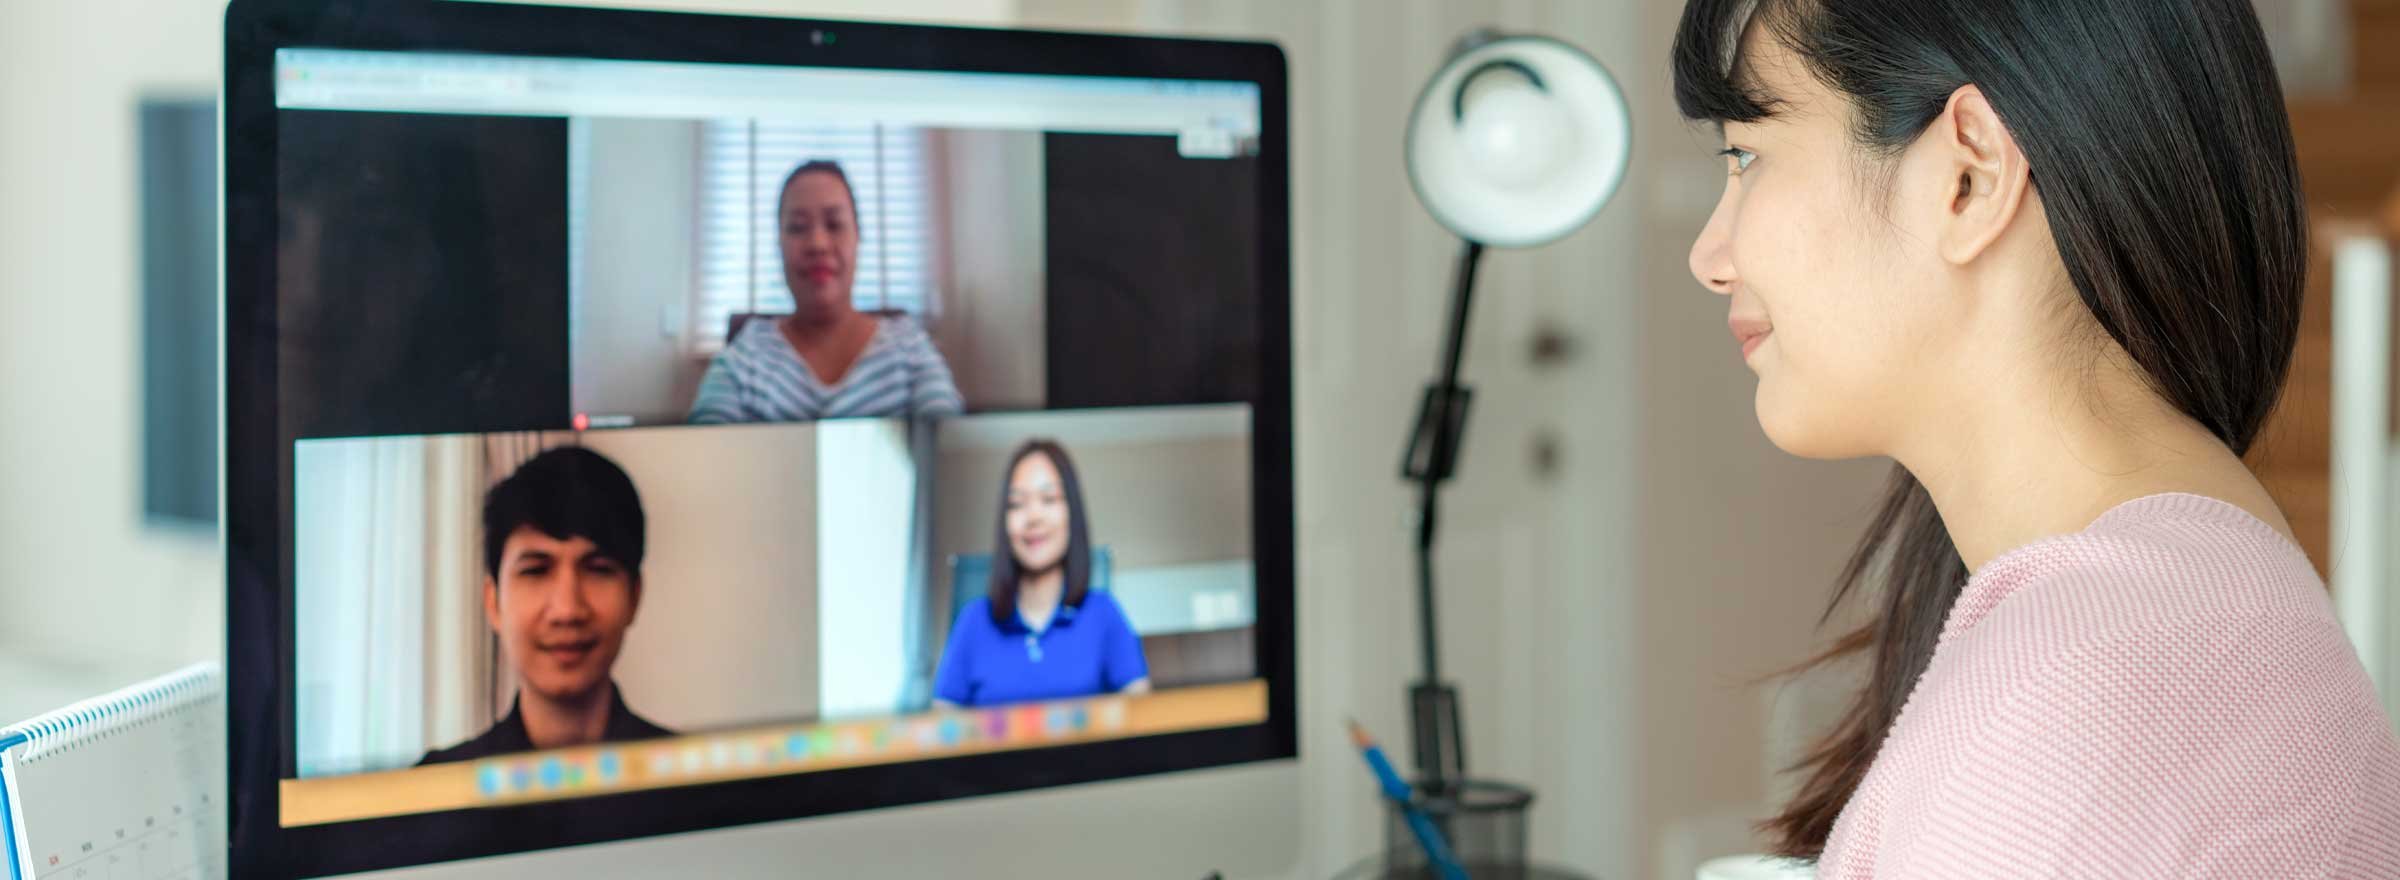 woman in video conference with three other people